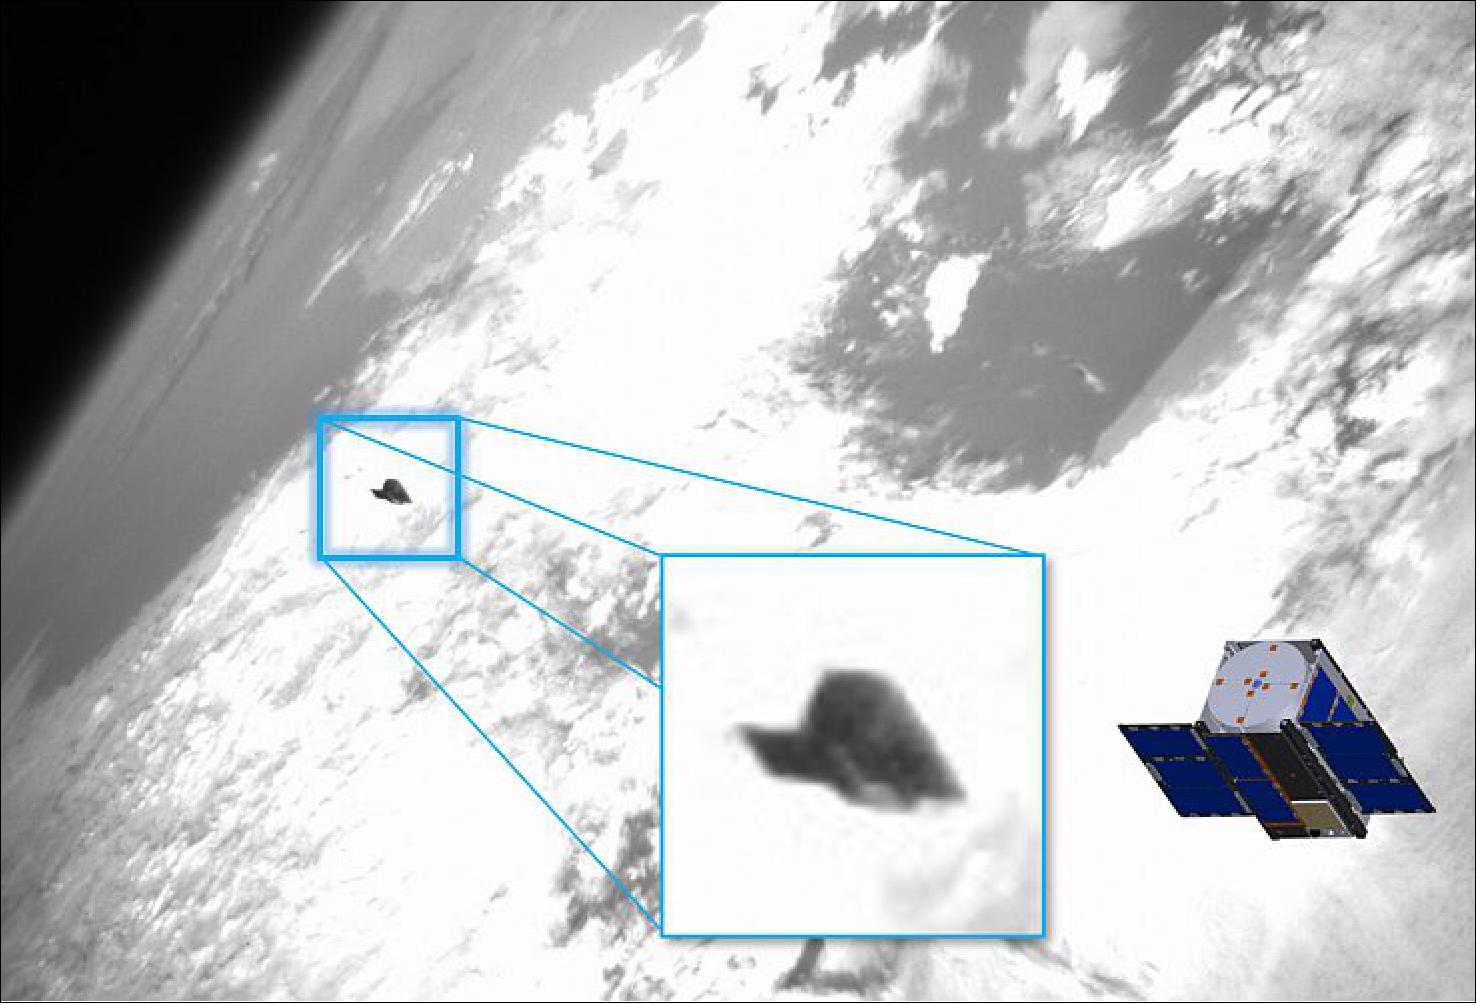 Figure 4: Photo of AeroCube-10A in space taken by AeroCube-10B. AeroCube-10A (which is only 10 x 10 x 15 cm itself) photographed from 26 meters away (image credit: The Aerospace Corporation)